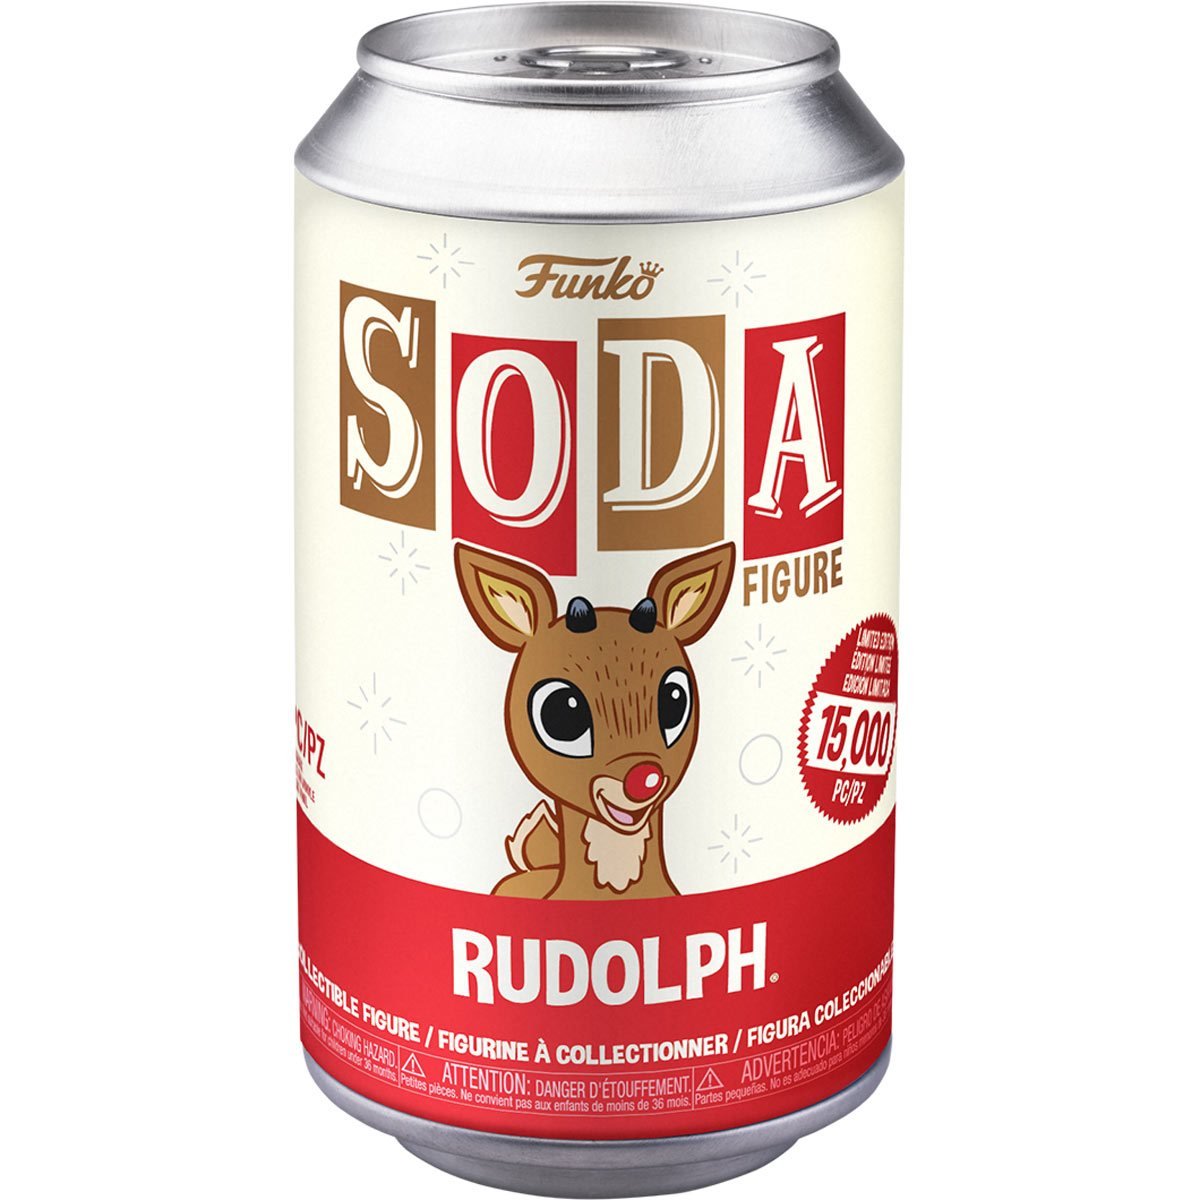 Funko SODA RUDOLPH Island of Misfit Toys SEALED CAN~ Figure 4.25" 1 of 15,000 